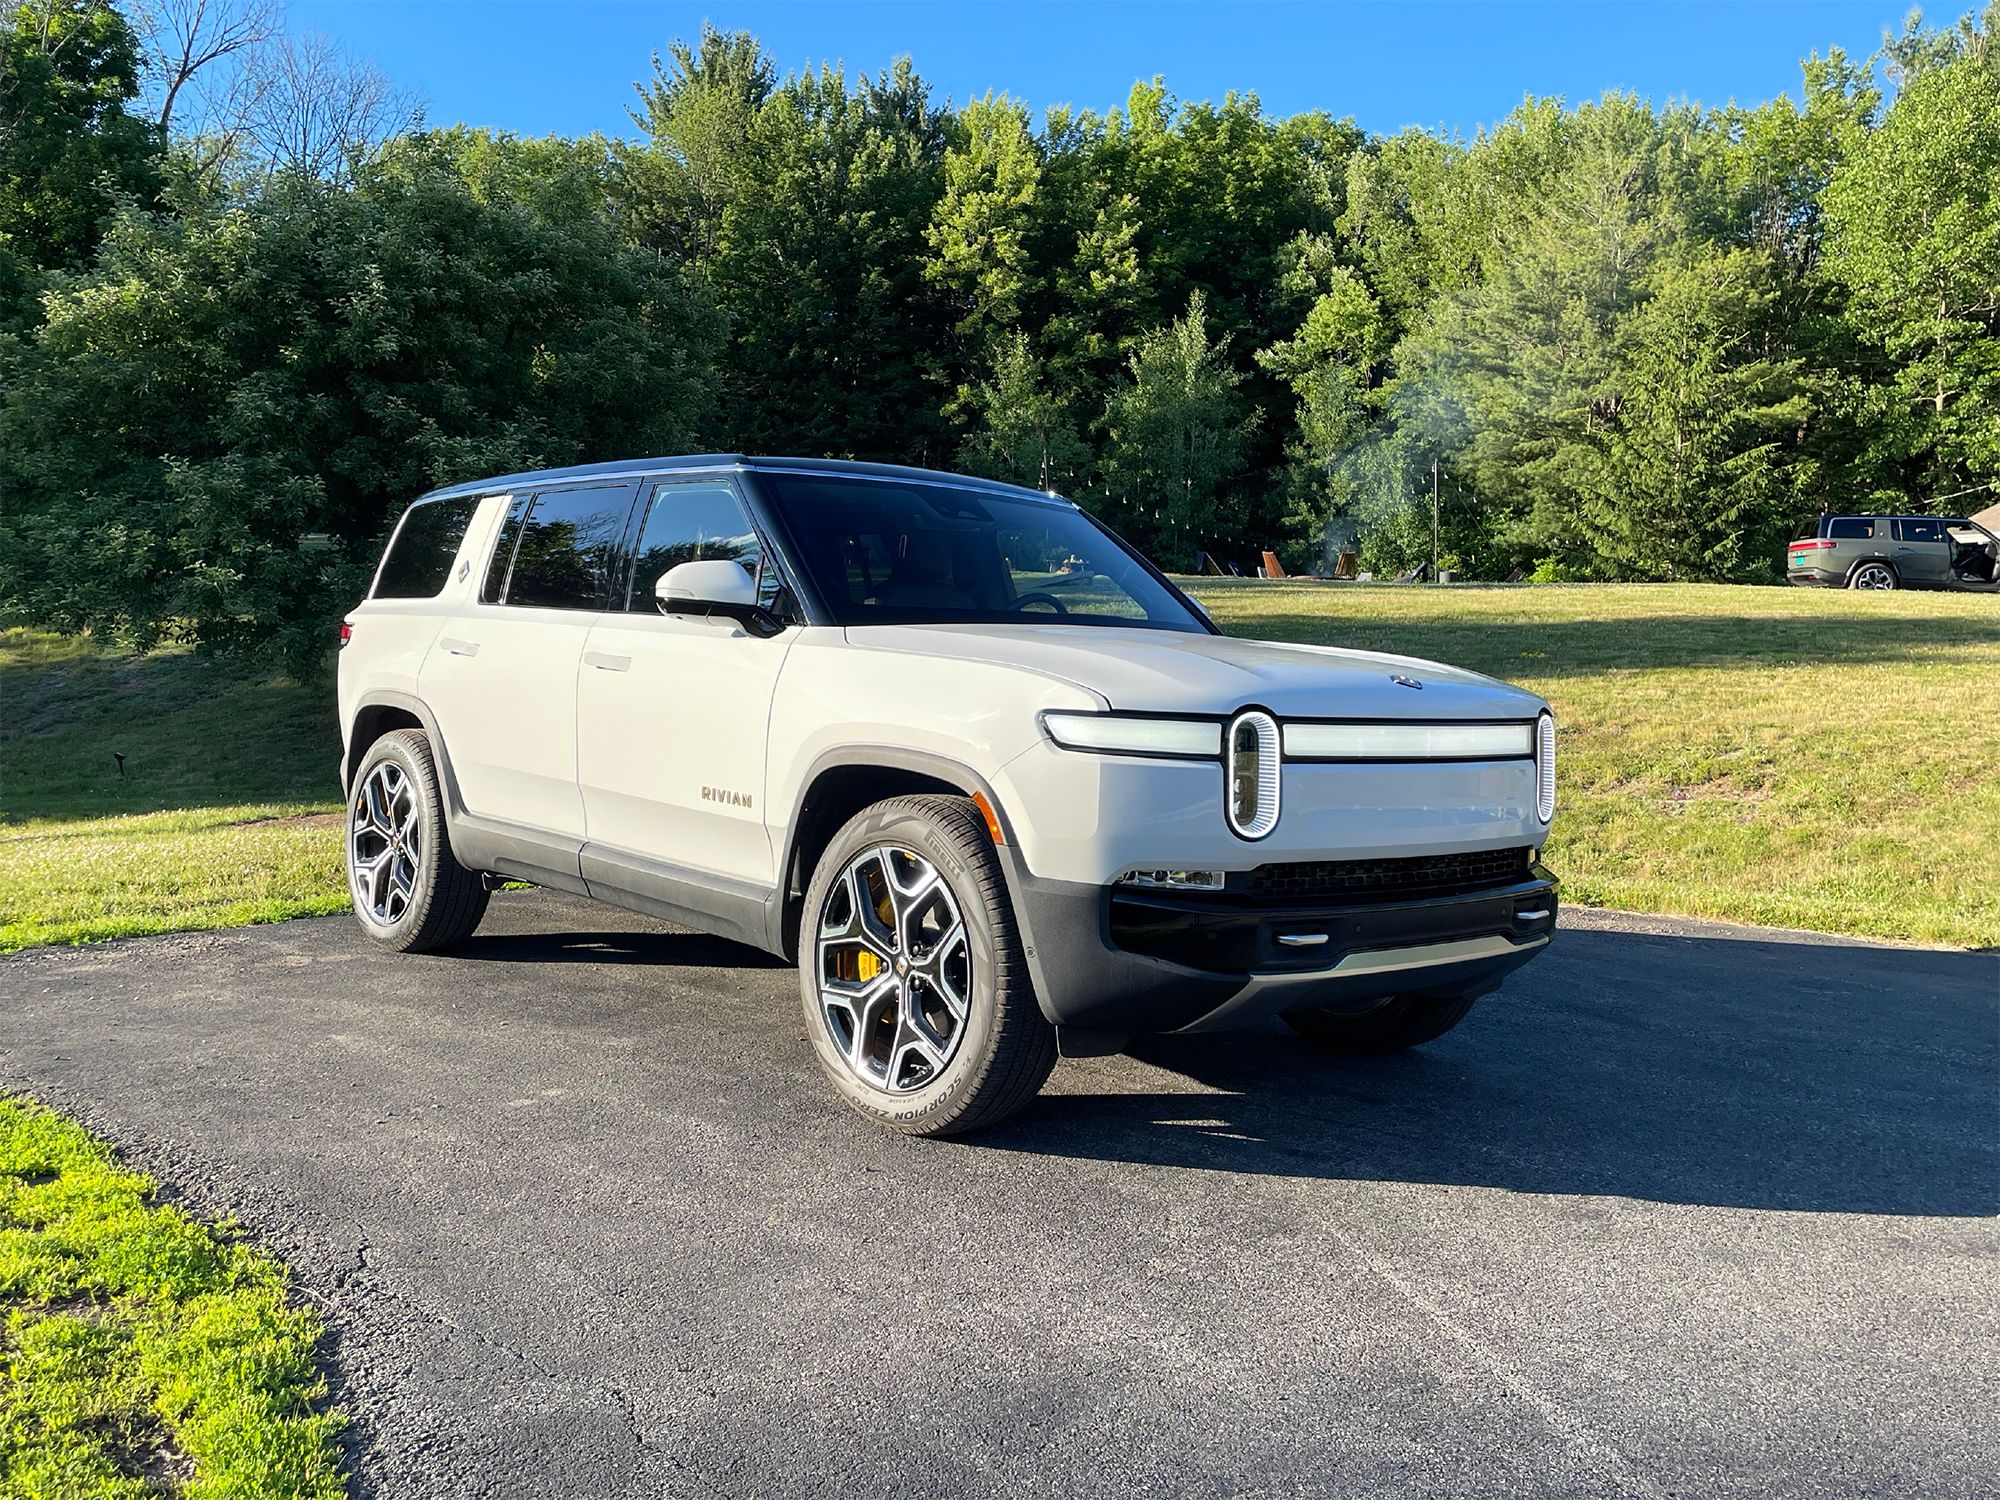 Stay Safe On Icy Roads - Get the Right Winter Tires and Use Rivian's AI-Powered Traction Control System for Maximum Grip